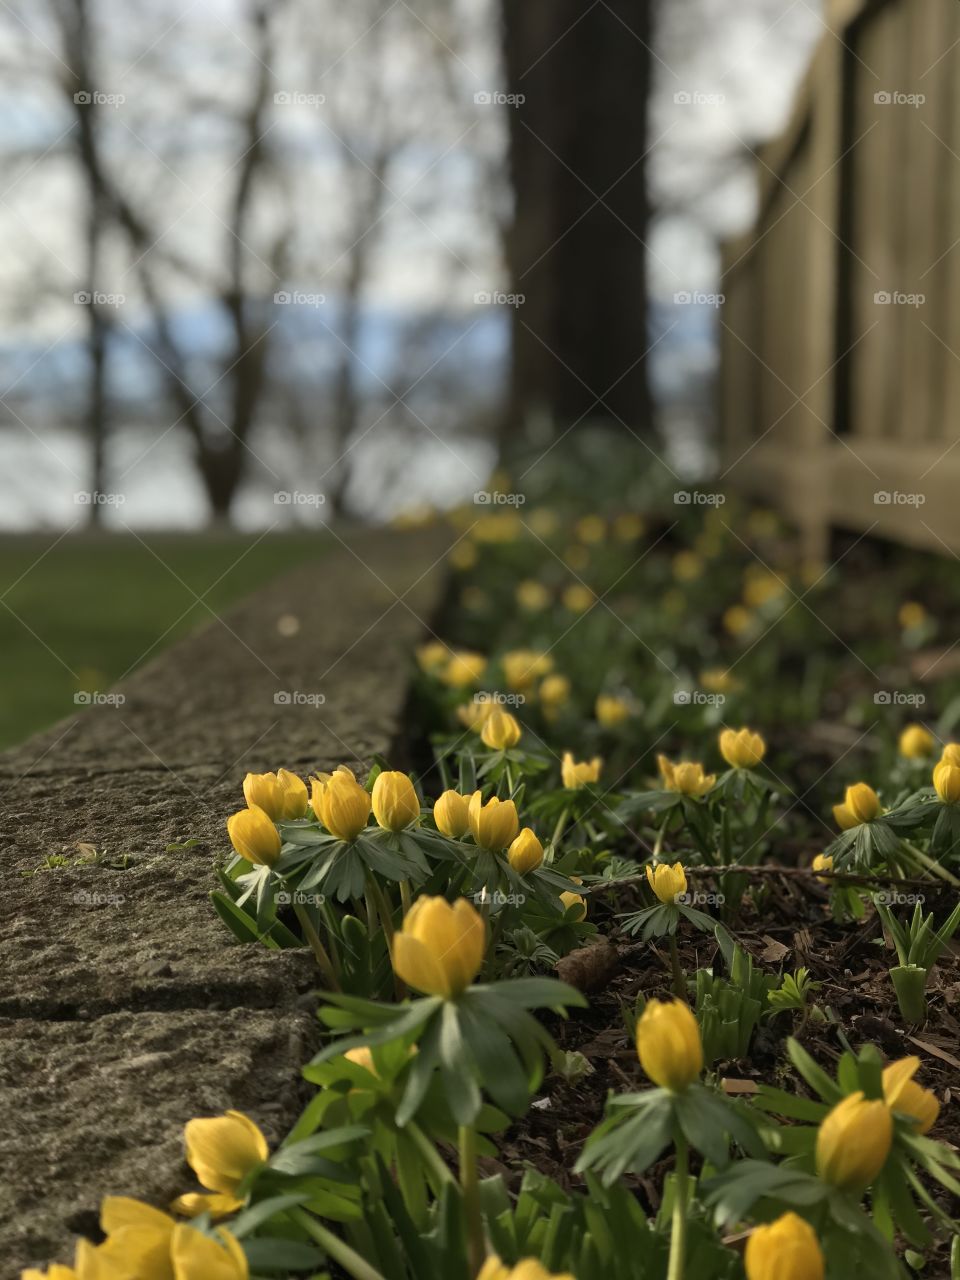 Little yellow aconite blossoming in a raised garden bed at a favourite garden park. A view of the mountains can be seen in the background through the still bare trees Will be visiting tomorrow again to get my Spring On with more flower shots!